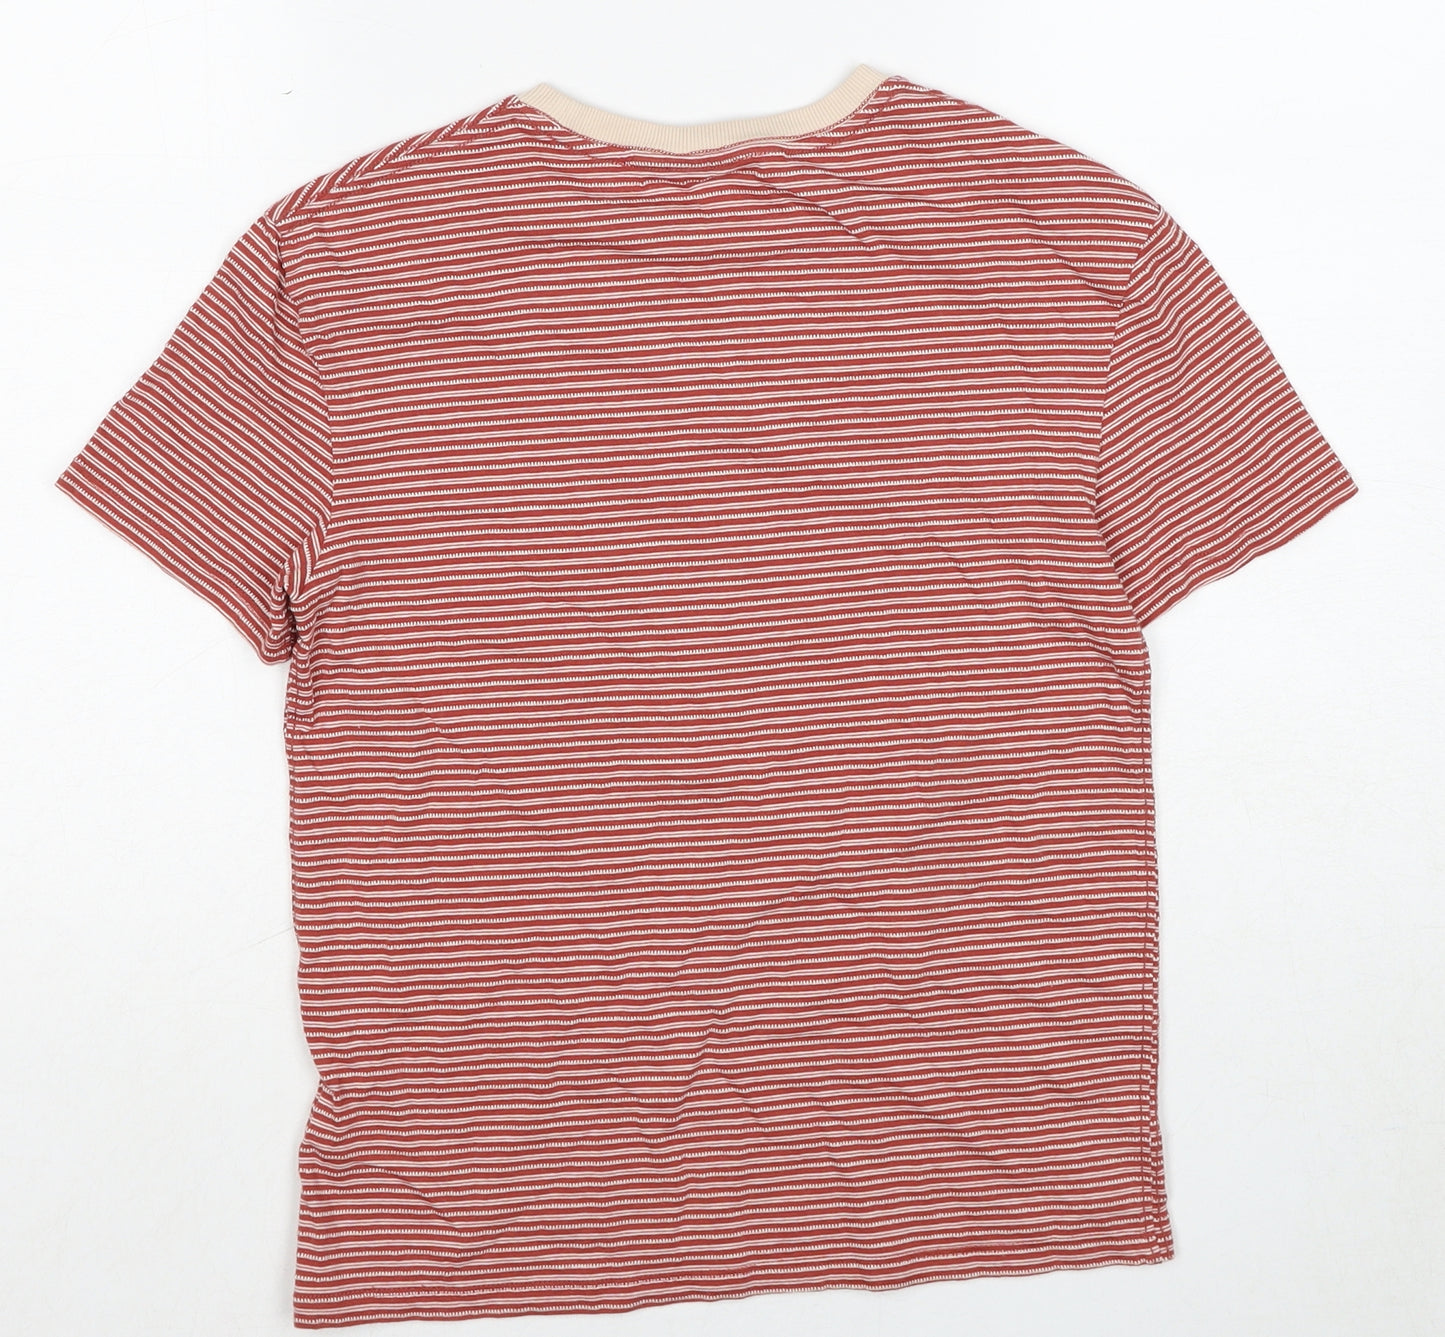 Marks and Spencer Boys Red Striped Cotton Basic T-Shirt Size 9-10 Years Round Neck Pullover